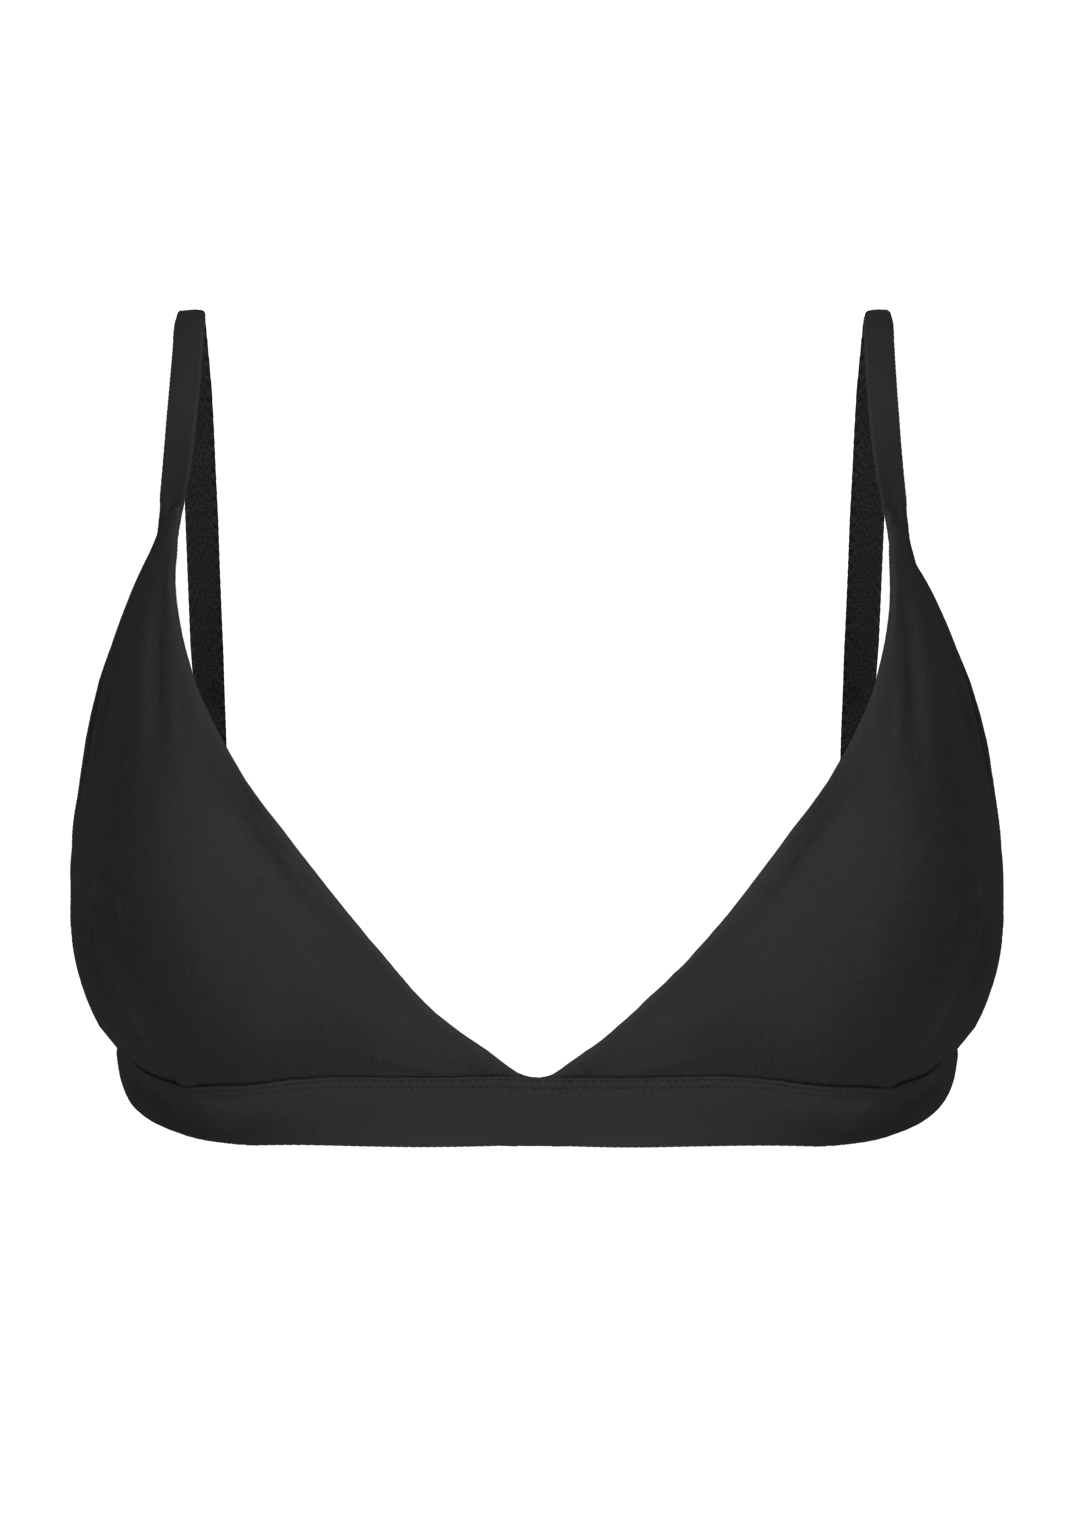 TRIANGLE BRA SET OF 3 – SIMPLE AS IS